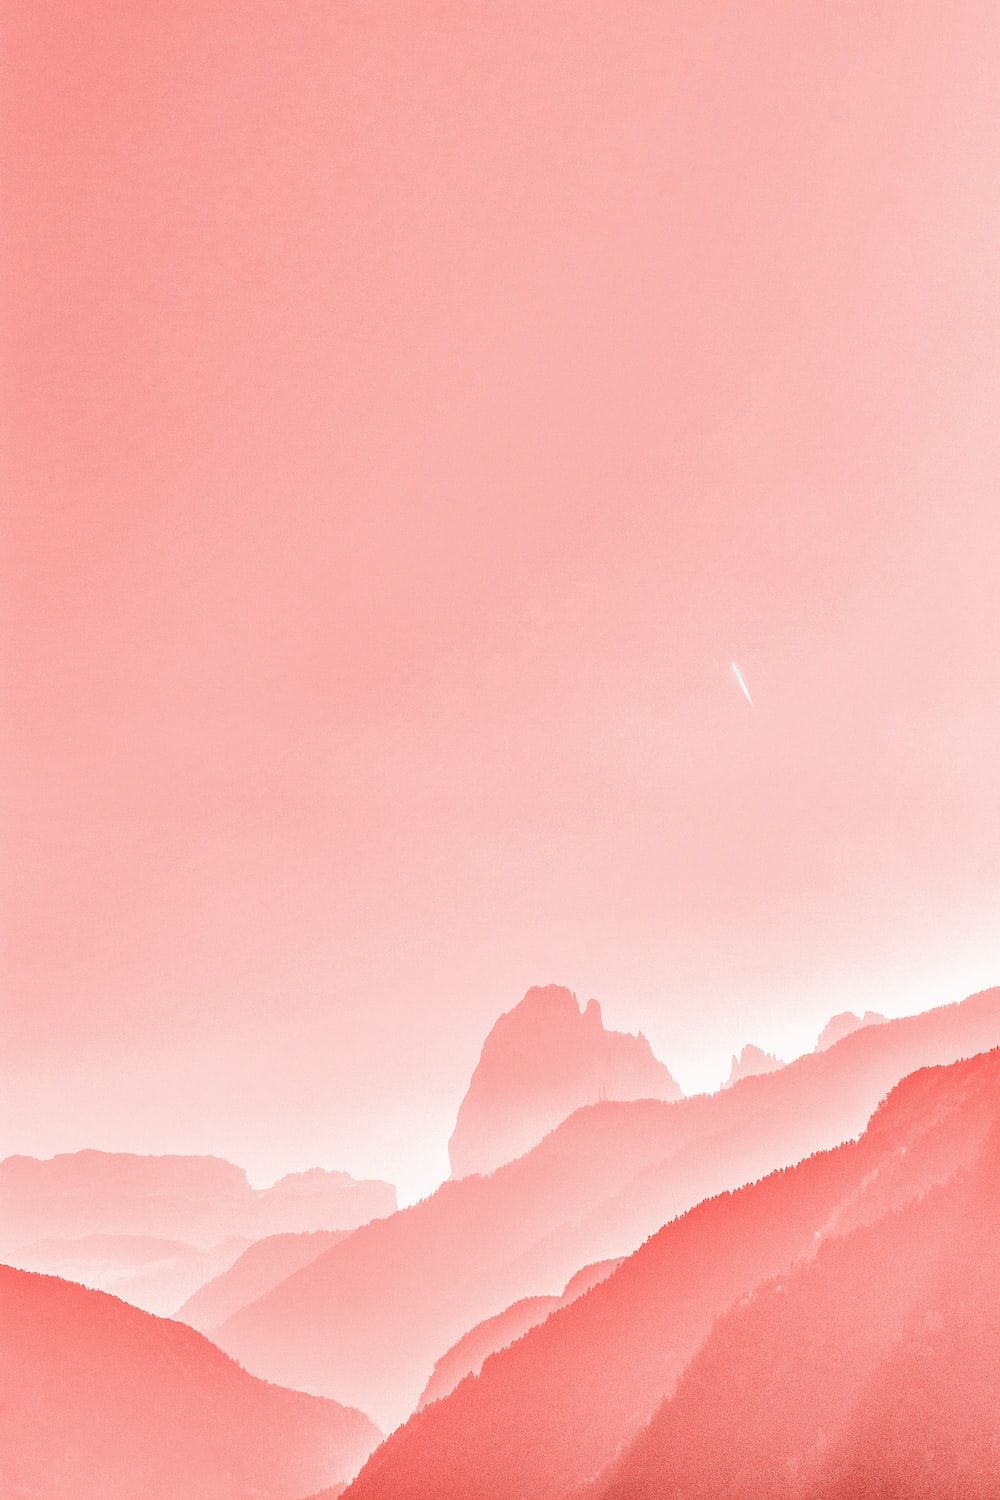 A plane flying over the mountains in pink - Salmon, coral